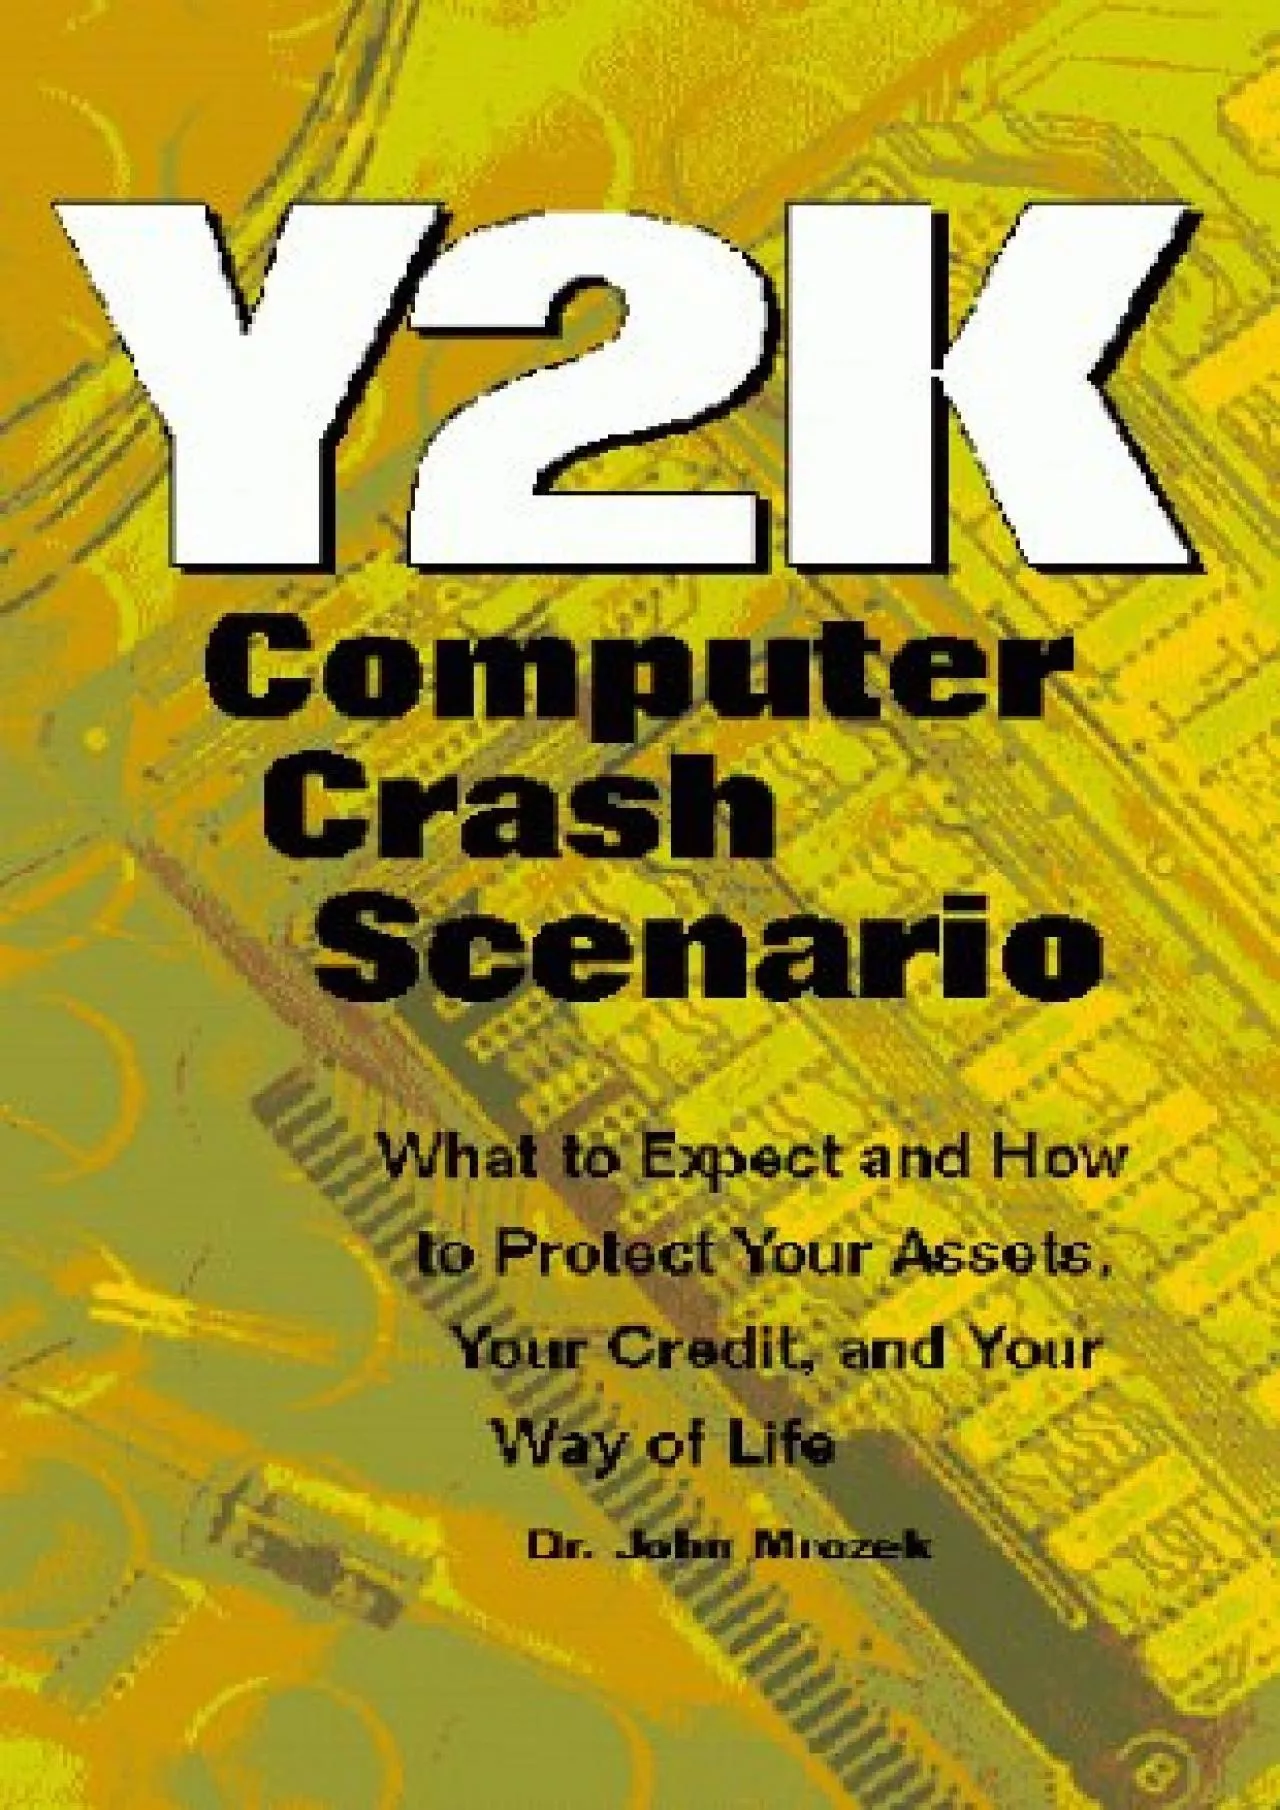 [FREE]-Y2K Computer Crash Scenario: What To Expect And How To Protect Your Assets, Your